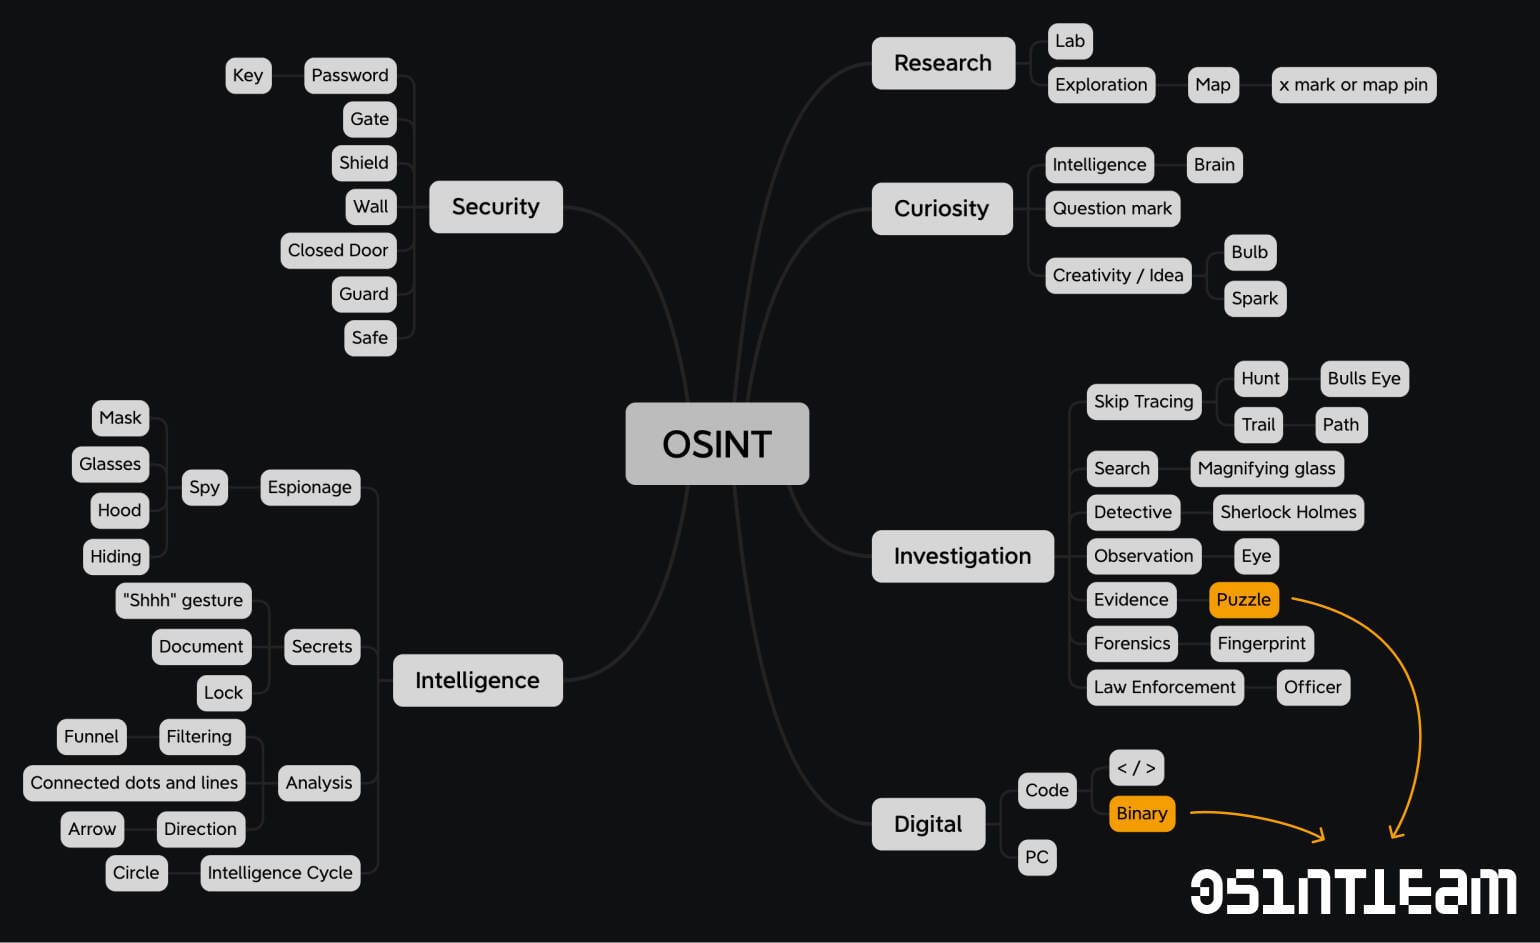 Mind map of associations for the OSINT